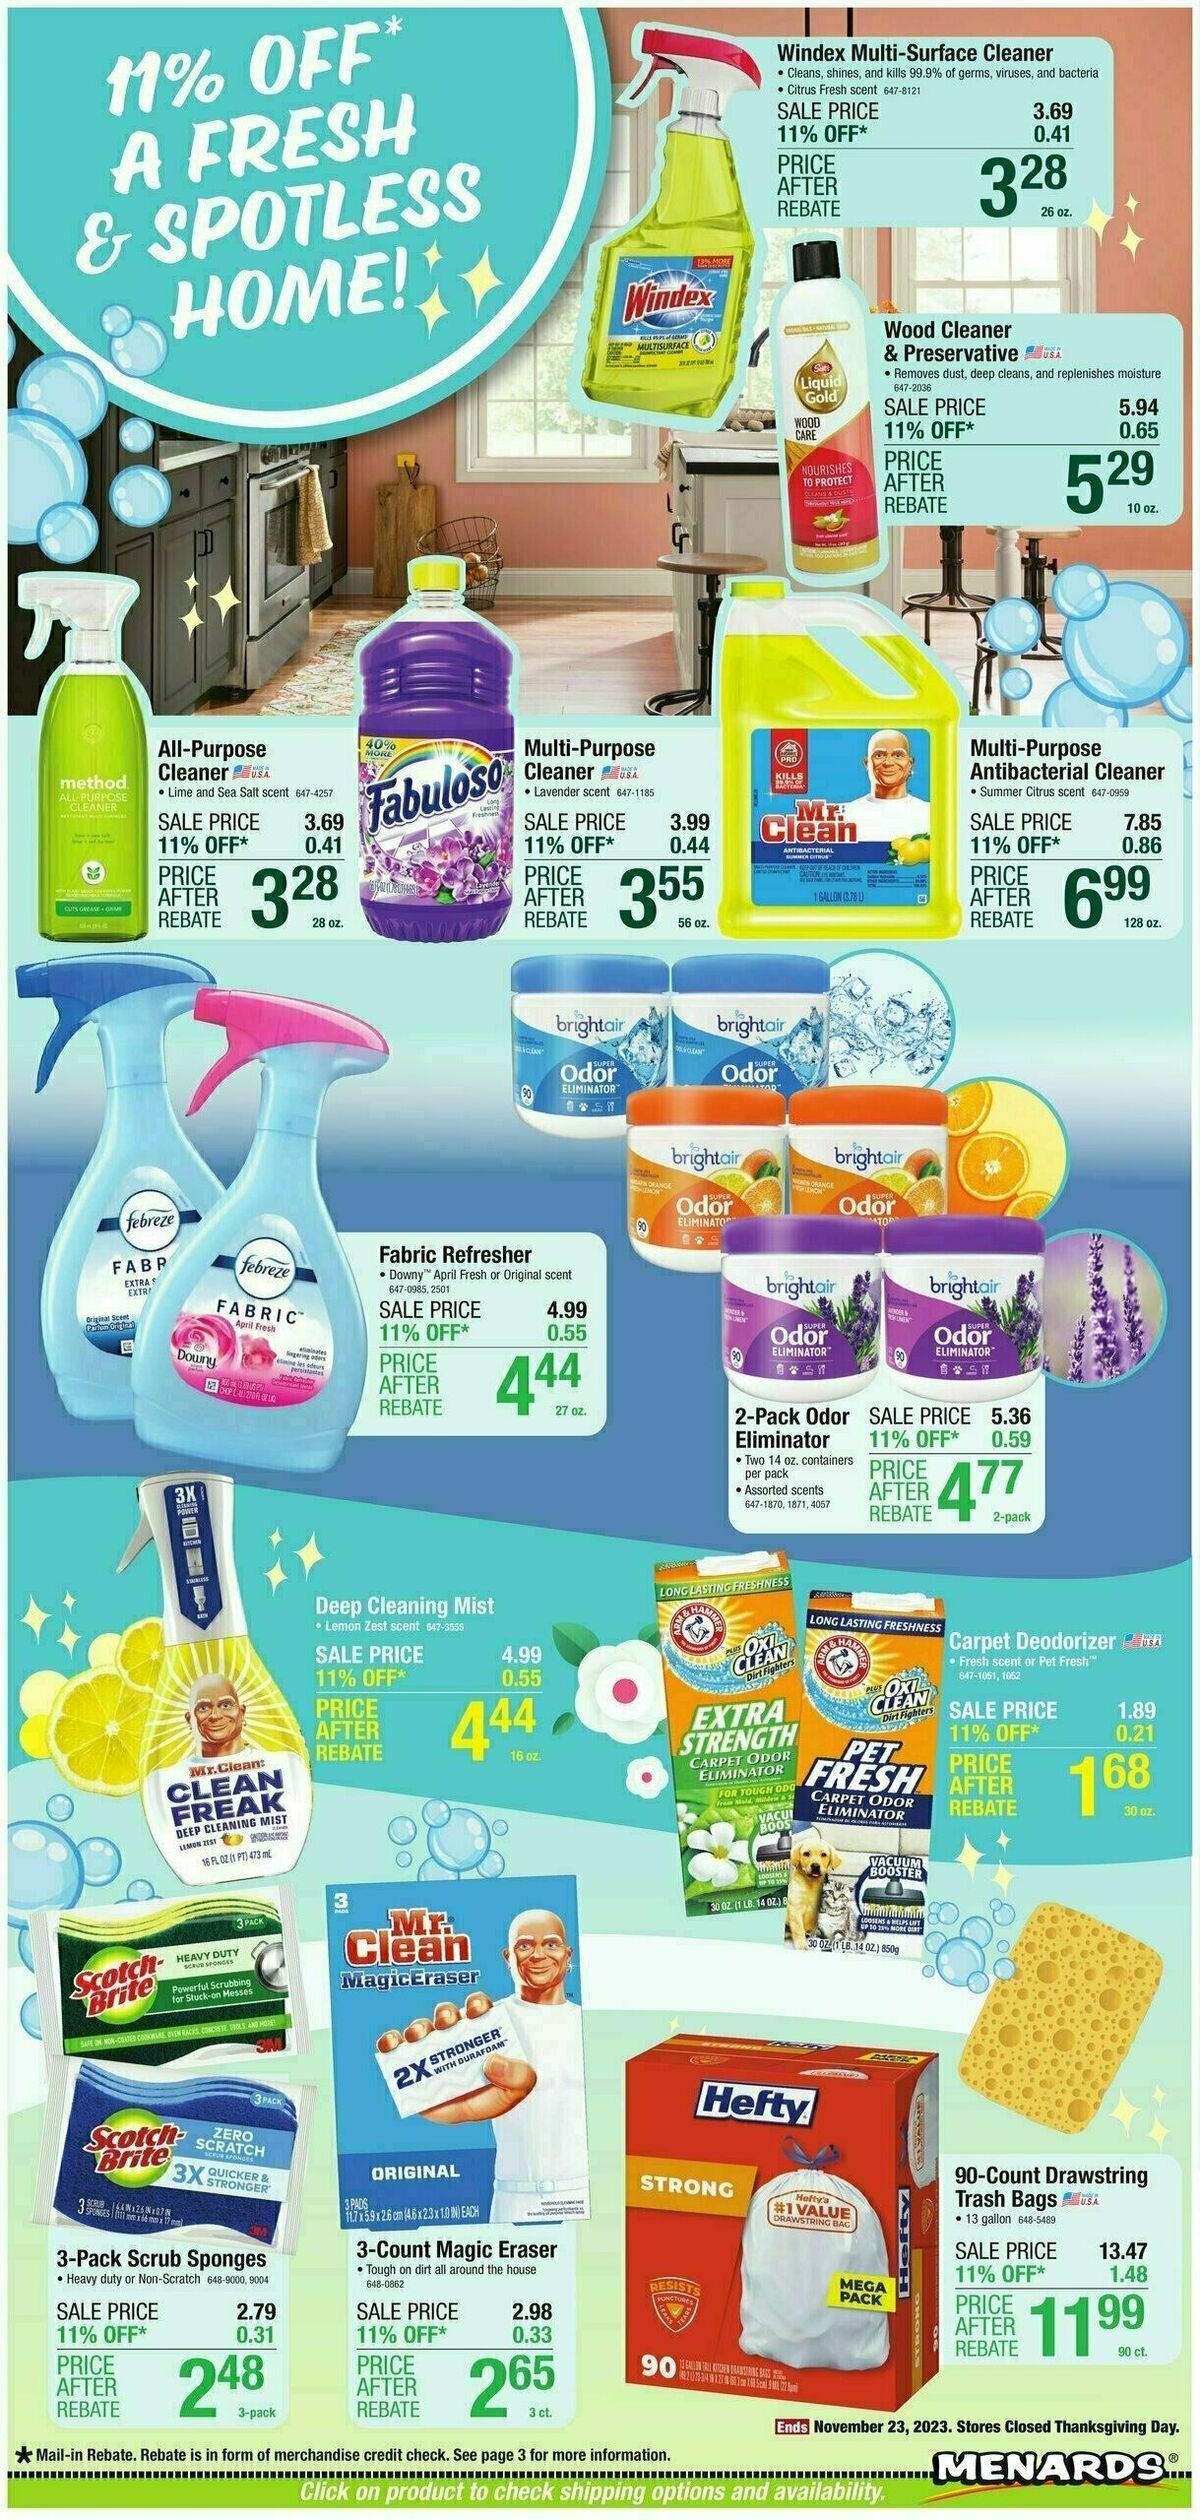 Menards Home Essentials Weekly Ad from November 8